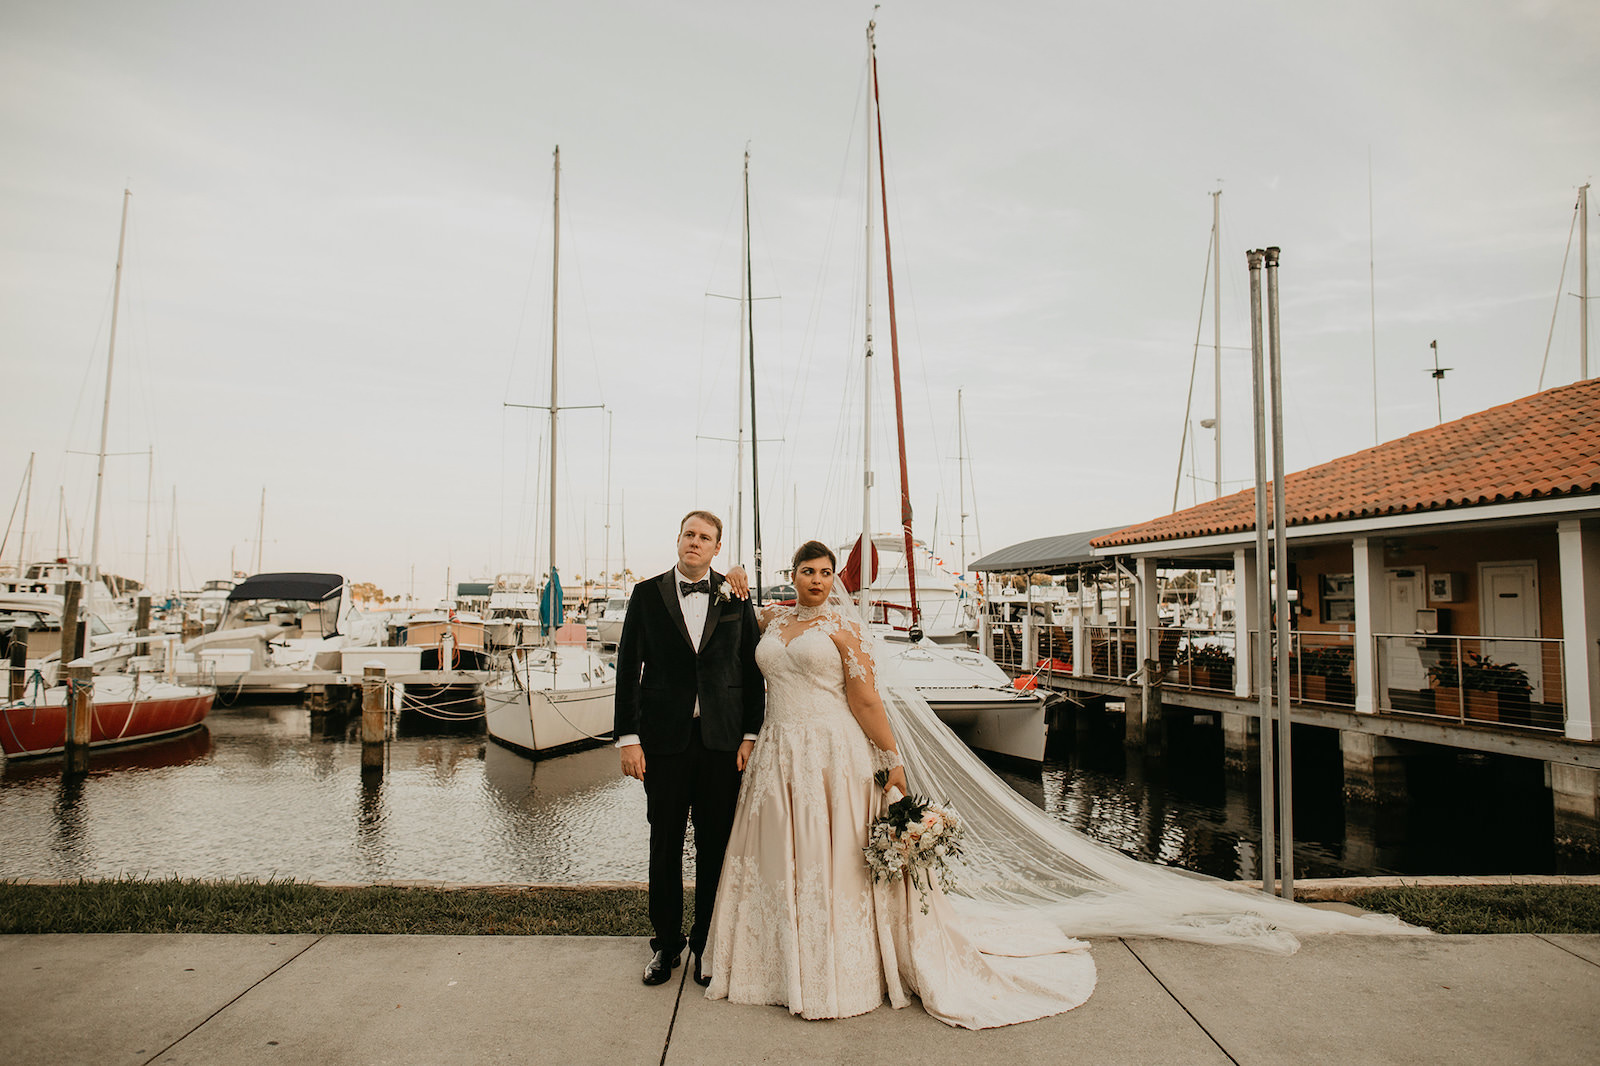 Downtown St. Petersburg Florida Marina Outdoor Bride and Groom Portrait | Champagne and Ivory Lace Allure Bridal Ball Gown with Sweetheart Neckline and Illusion Lace Bodice and Sleeves with Cathedral Veil | Groom Wearing Classic Black Tuxedo Suit with Bow Tie